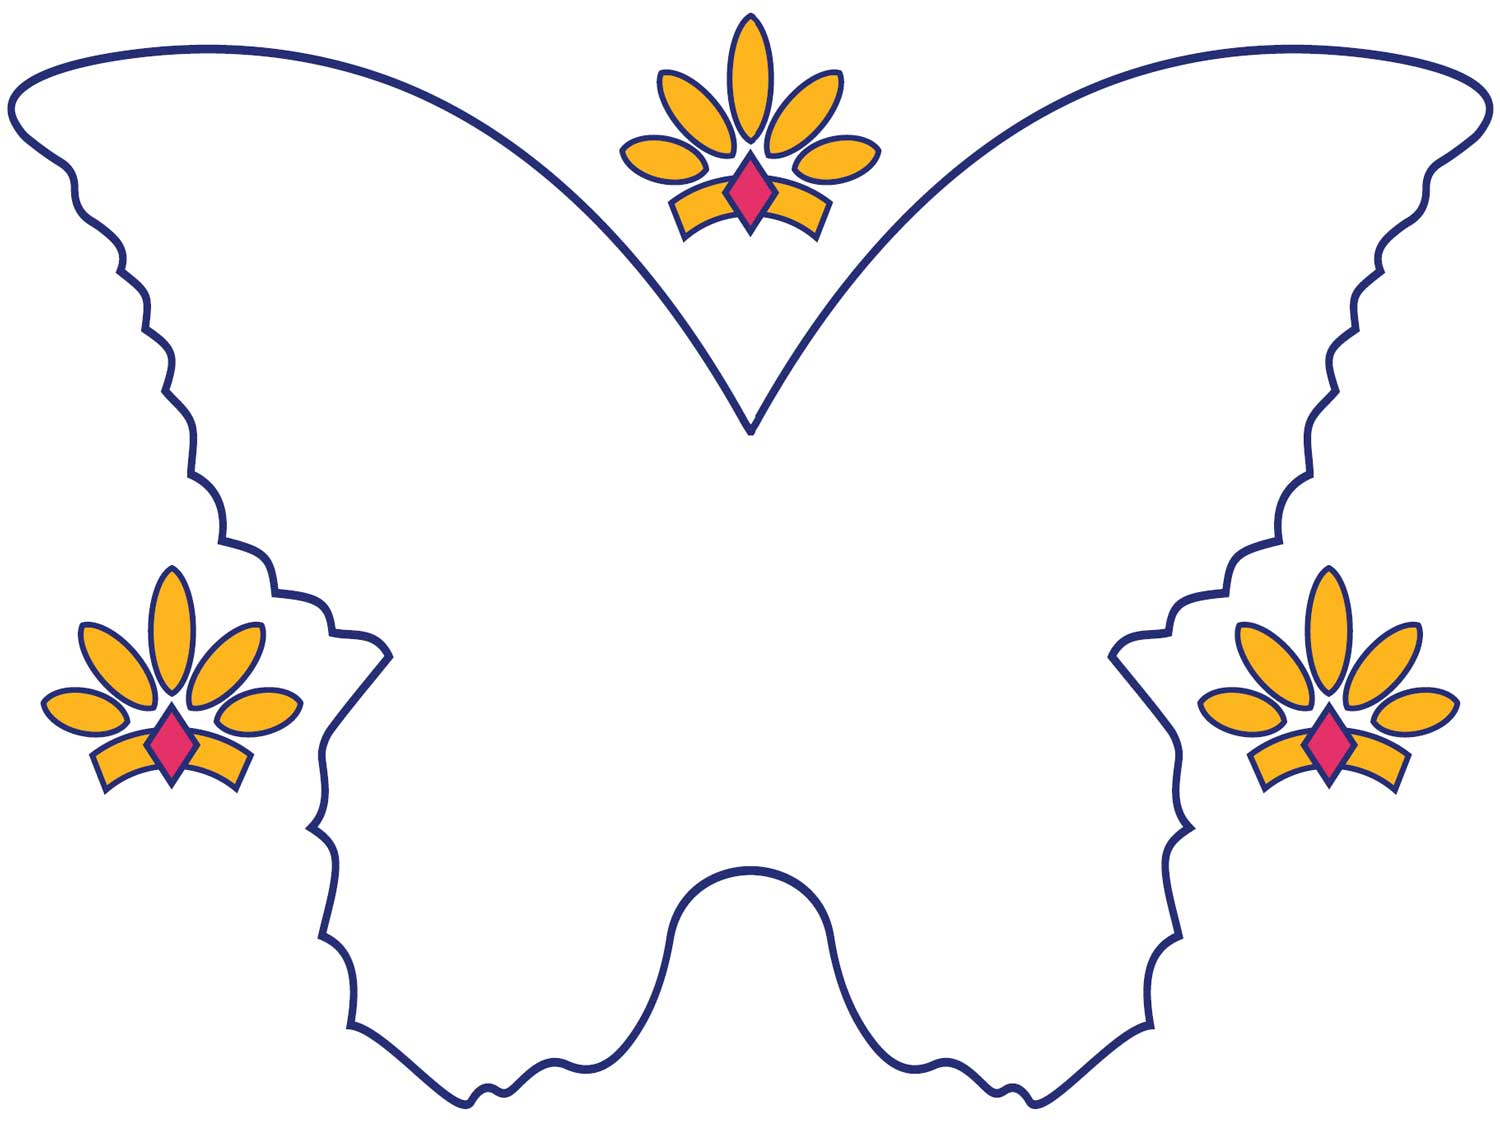 Illustrations of the outline of a butterfly and three colourful tiaras.